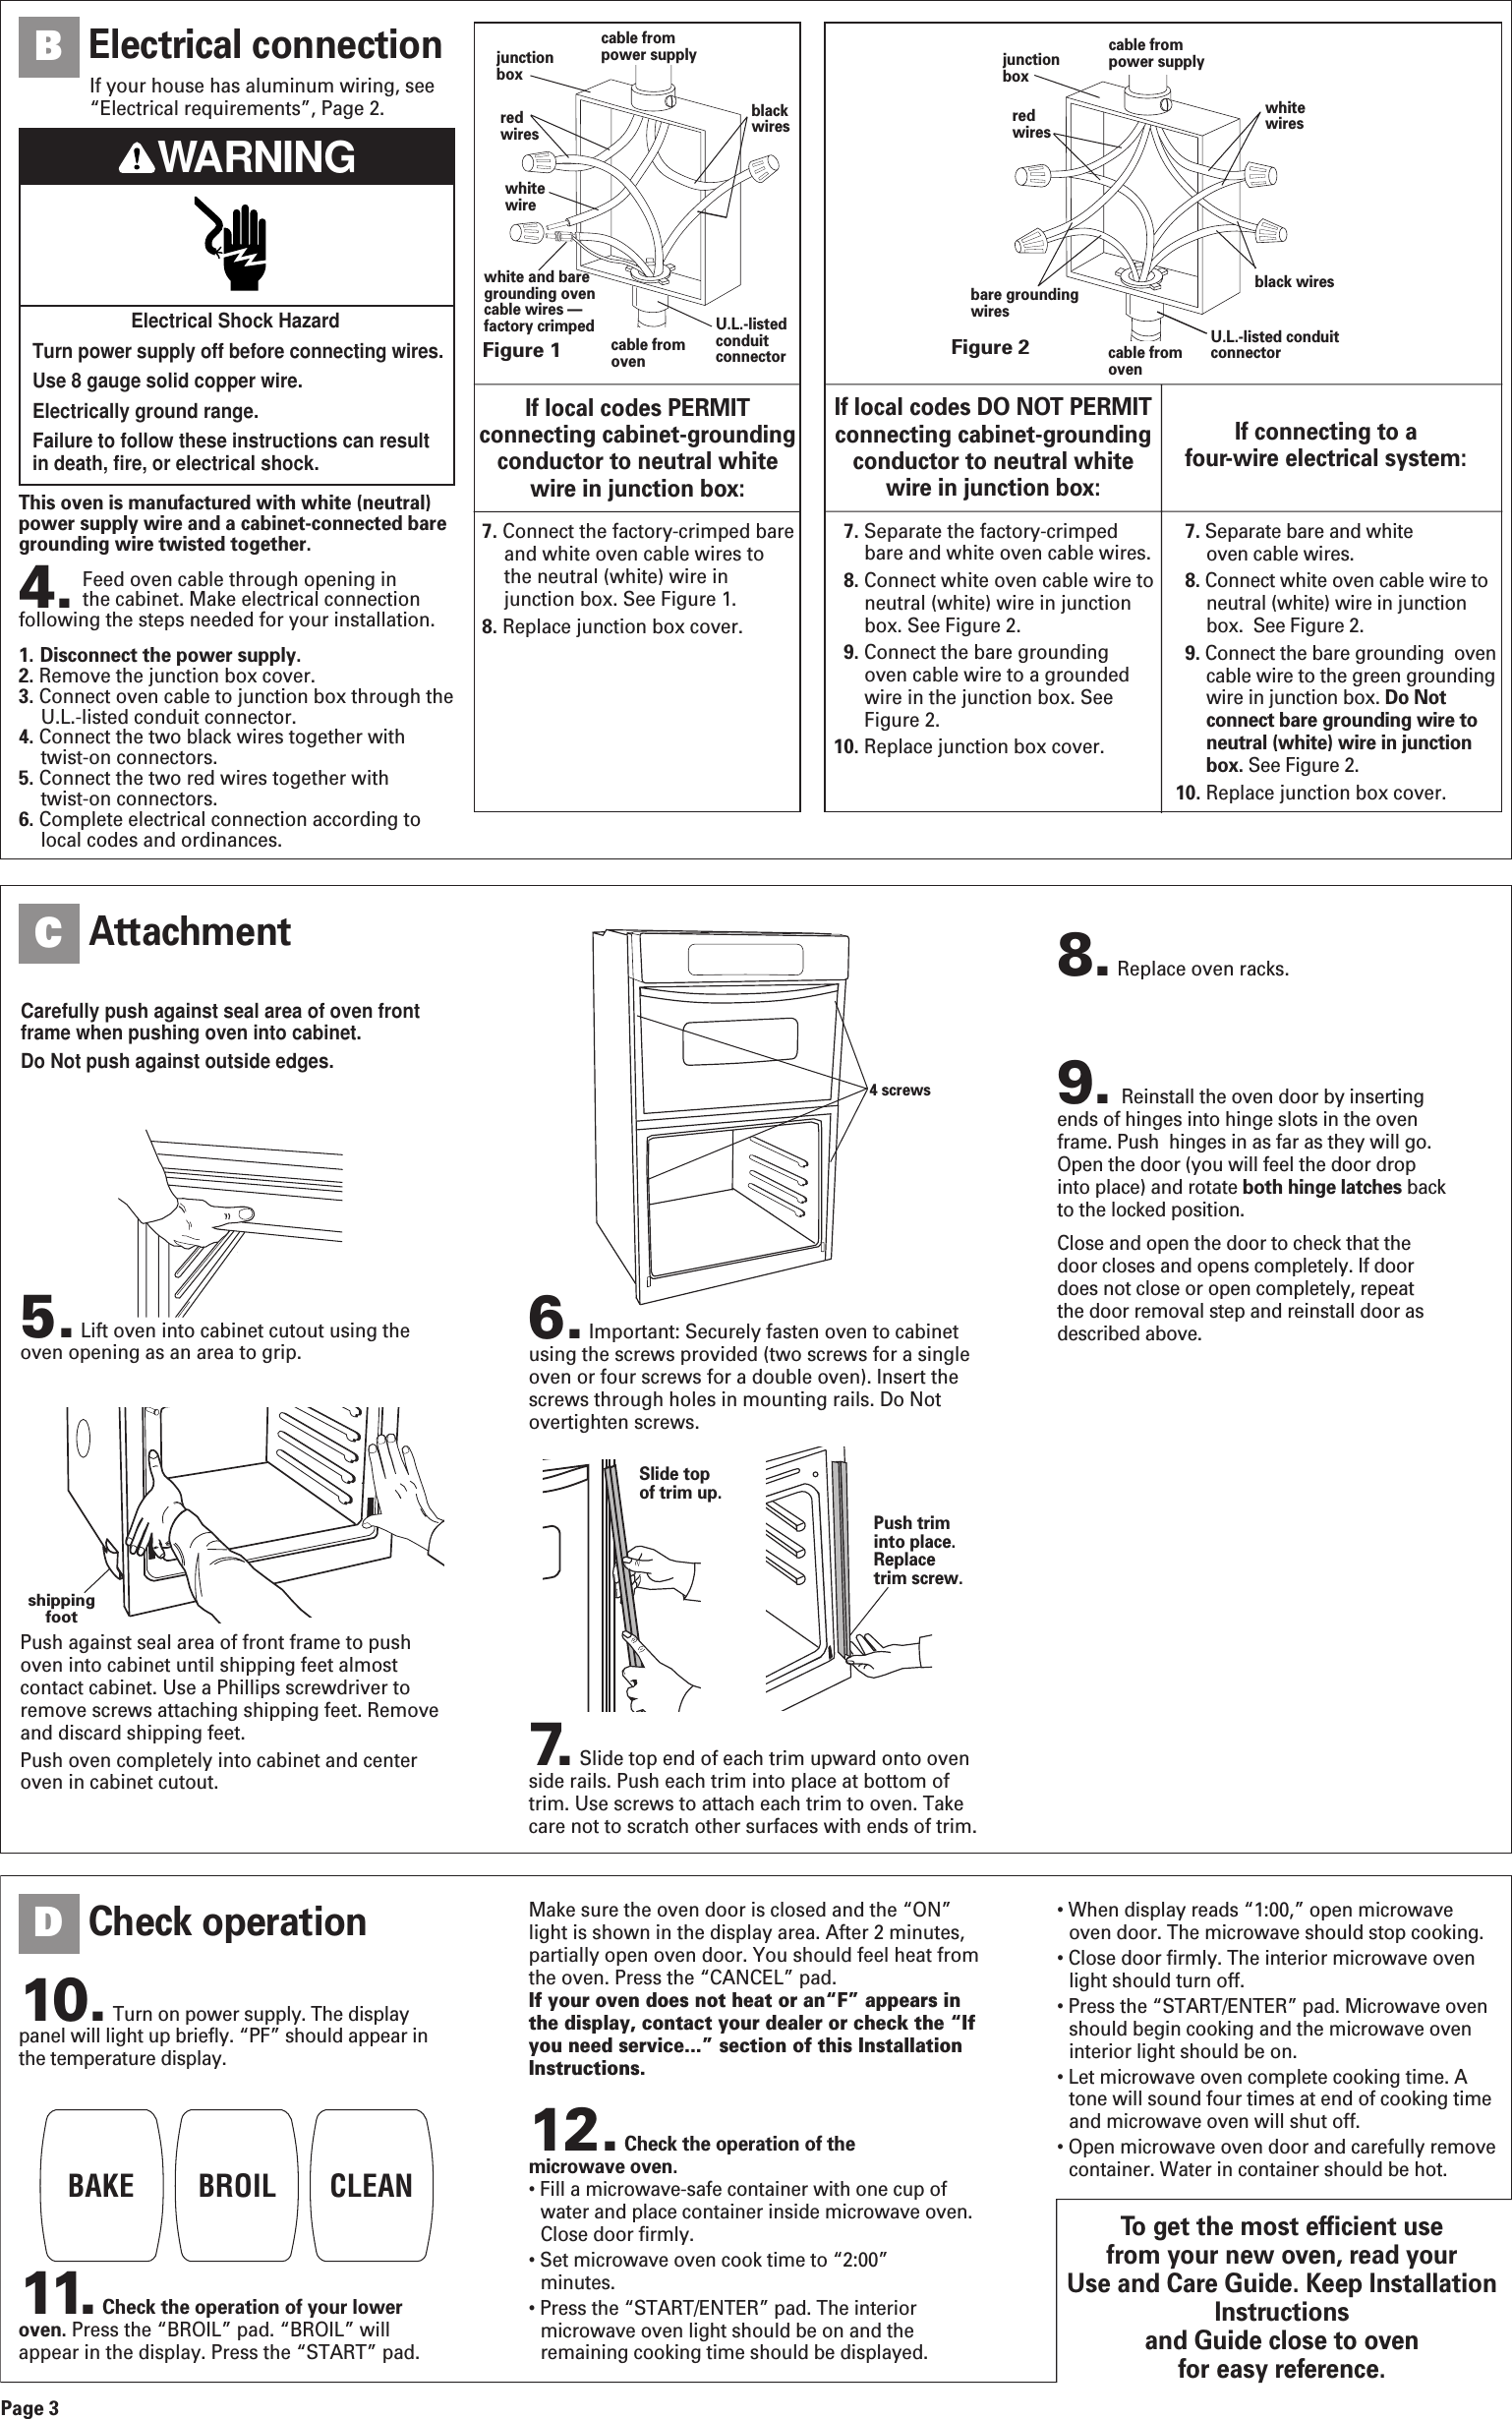 To get the most efficient use from your new oven, read your Use and Care Guide. Keep InstallationInstructions and Guide close to oven for easy reference.This oven is manufactured with white (neutral)power supply wire and a cabinet-connected baregrounding wire twisted together.4. Feed oven cable through opening in the cabinet. Make electrical connectionfollowing the steps needed for your installation.1. Disconnect the power supply.2. Remove the junction box cover.3. Connect oven cable to junction box through theU.L.-listed conduit connector. 4. Connect the two black wires together withtwist-on connectors.5. Connect the two red wires together with twist-on connectors. 6. Complete electrical connection according tolocal codes and ordinances.Figure 1junctionboxredwireswhitewirewhite and baregrounding ovencable wires —factory crimpedcable frompower supplyblackwirescable fromovenU.L.-listedconduitconnectorFigure 2cable frompower supplycable fromovenjunctionboxU.L.-listed conduitconnectorredwireswhitewiresblack wiresbare groundingwiresIf local codes PERMITconnecting cabinet-groundingconductor to neutral white wire in junction box:If local codes DO NOT PERMITconnecting cabinet-groundingconductor to neutral white wire in junction box:If connecting to a four-wire electrical system:7. Connect the factory-crimped bareand white oven cable wires tothe neutral (white) wire injunction box. See Figure 1.8. Replace junction box cover.7. Separate the factory-crimpedbare and white oven cable wires.8. Connect white oven cable wire toneutral (white) wire in junctionbox. See Figure 2.9. Connect the bare groundingoven cable wire to a groundedwire in the junction box. SeeFigure 2.10. Replace junction box cover.7. Separate bare and white oven cable wires.8. Connect white oven cable wire toneutral (white) wire in junctionbox.  See Figure 2.9. Connect the bare grounding  ovencable wire to the green groundingwire in junction box. Do Notconnect bare grounding wire toneutral (white) wire in junctionbox. See Figure 2.10. Replace junction box cover.Carefully push against seal area of oven frontframe when pushing oven into cabinet.Do Not push against outside edges.5.Lift oven into cabinet cutout using theoven opening as an area to grip.Page 3Push against seal area of front frame to pushoven into cabinet until shipping feet almostcontact cabinet. Use a Phillips screwdriver toremove screws attaching shipping feet. Removeand discard shipping feet.Push oven completely into cabinet and centeroven in cabinet cutout.8.Replace oven racks. 11. Check the operation of your loweroven. Press the “BROIL” pad. “BROIL” willappear in the display. Press the “START” pad.12. Check the operation of the microwave oven.• Fill a microwave-safe container with one cup ofwater and place container inside microwave oven.Close door firmly.• Set microwave oven cook time to “2:00” minutes.• Press the “START/ENTER” pad. The interiormicrowave oven light should be on and theremaining cooking time should be displayed.Electrical connectionBAttachmentCCheck operationDPush triminto place.Replacetrim screw.Slide topof trim up.10. Turn on power supply. The displaypanel will light up briefly. “PF” should appear inthe temperature display.Make sure the oven door is closed and the “ON”light is shown in the display area. After 2 minutes,partially open oven door. You should feel heat fromthe oven. Press the “CANCEL” pad.If your oven does not heat or an“F” appears inthe display, contact your dealer or check the “Ifyou need service...” section of this InstallationInstructions.• When display reads “1:00,” open microwaveoven door. The microwave should stop cooking.• Close door firmly. The interior microwave ovenlight should turn off.• Press the “START/ENTER” pad. Microwave ovenshould begin cooking and the microwave oveninterior light should be on.• Let microwave oven complete cooking time. Atone will sound four times at end of cooking timeand microwave oven will shut off.• Open microwave oven door and carefully removecontainer. Water in container should be hot.BAKE BROIL CLEANshippingfoot6.Important: Securely fasten oven to cabinetusing the screws provided (two screws for a singleoven or four screws for a double oven). Insert thescrews through holes in mounting rails. Do Notovertighten screws.7. Slide top end of each trim upward onto ovenside rails. Push each trim into place at bottom oftrim. Use screws to attach each trim to oven. Takecare not to scratch other surfaces with ends of trim.4 screwsElectrical Shock HazardTurn power supply off before connecting wires.Use 8 gauge solid copper wire.Electrically ground range.Failure to follow these instructions can resultin death, fire, or electrical shock.WARNINGIf your house has aluminum wiring, see“Electrical requirements”, Page 2.9. Reinstall the oven door by insertingends of hinges into hinge slots in the ovenframe. Push  hinges in as far as they will go.Open the door (you will feel the door dropinto place) and rotate both hinge latches backto the locked position.Close and open the door to check that thedoor closes and opens completely. If doordoes not close or open completely, repeatthe door removal step and reinstall door asdescribed above.